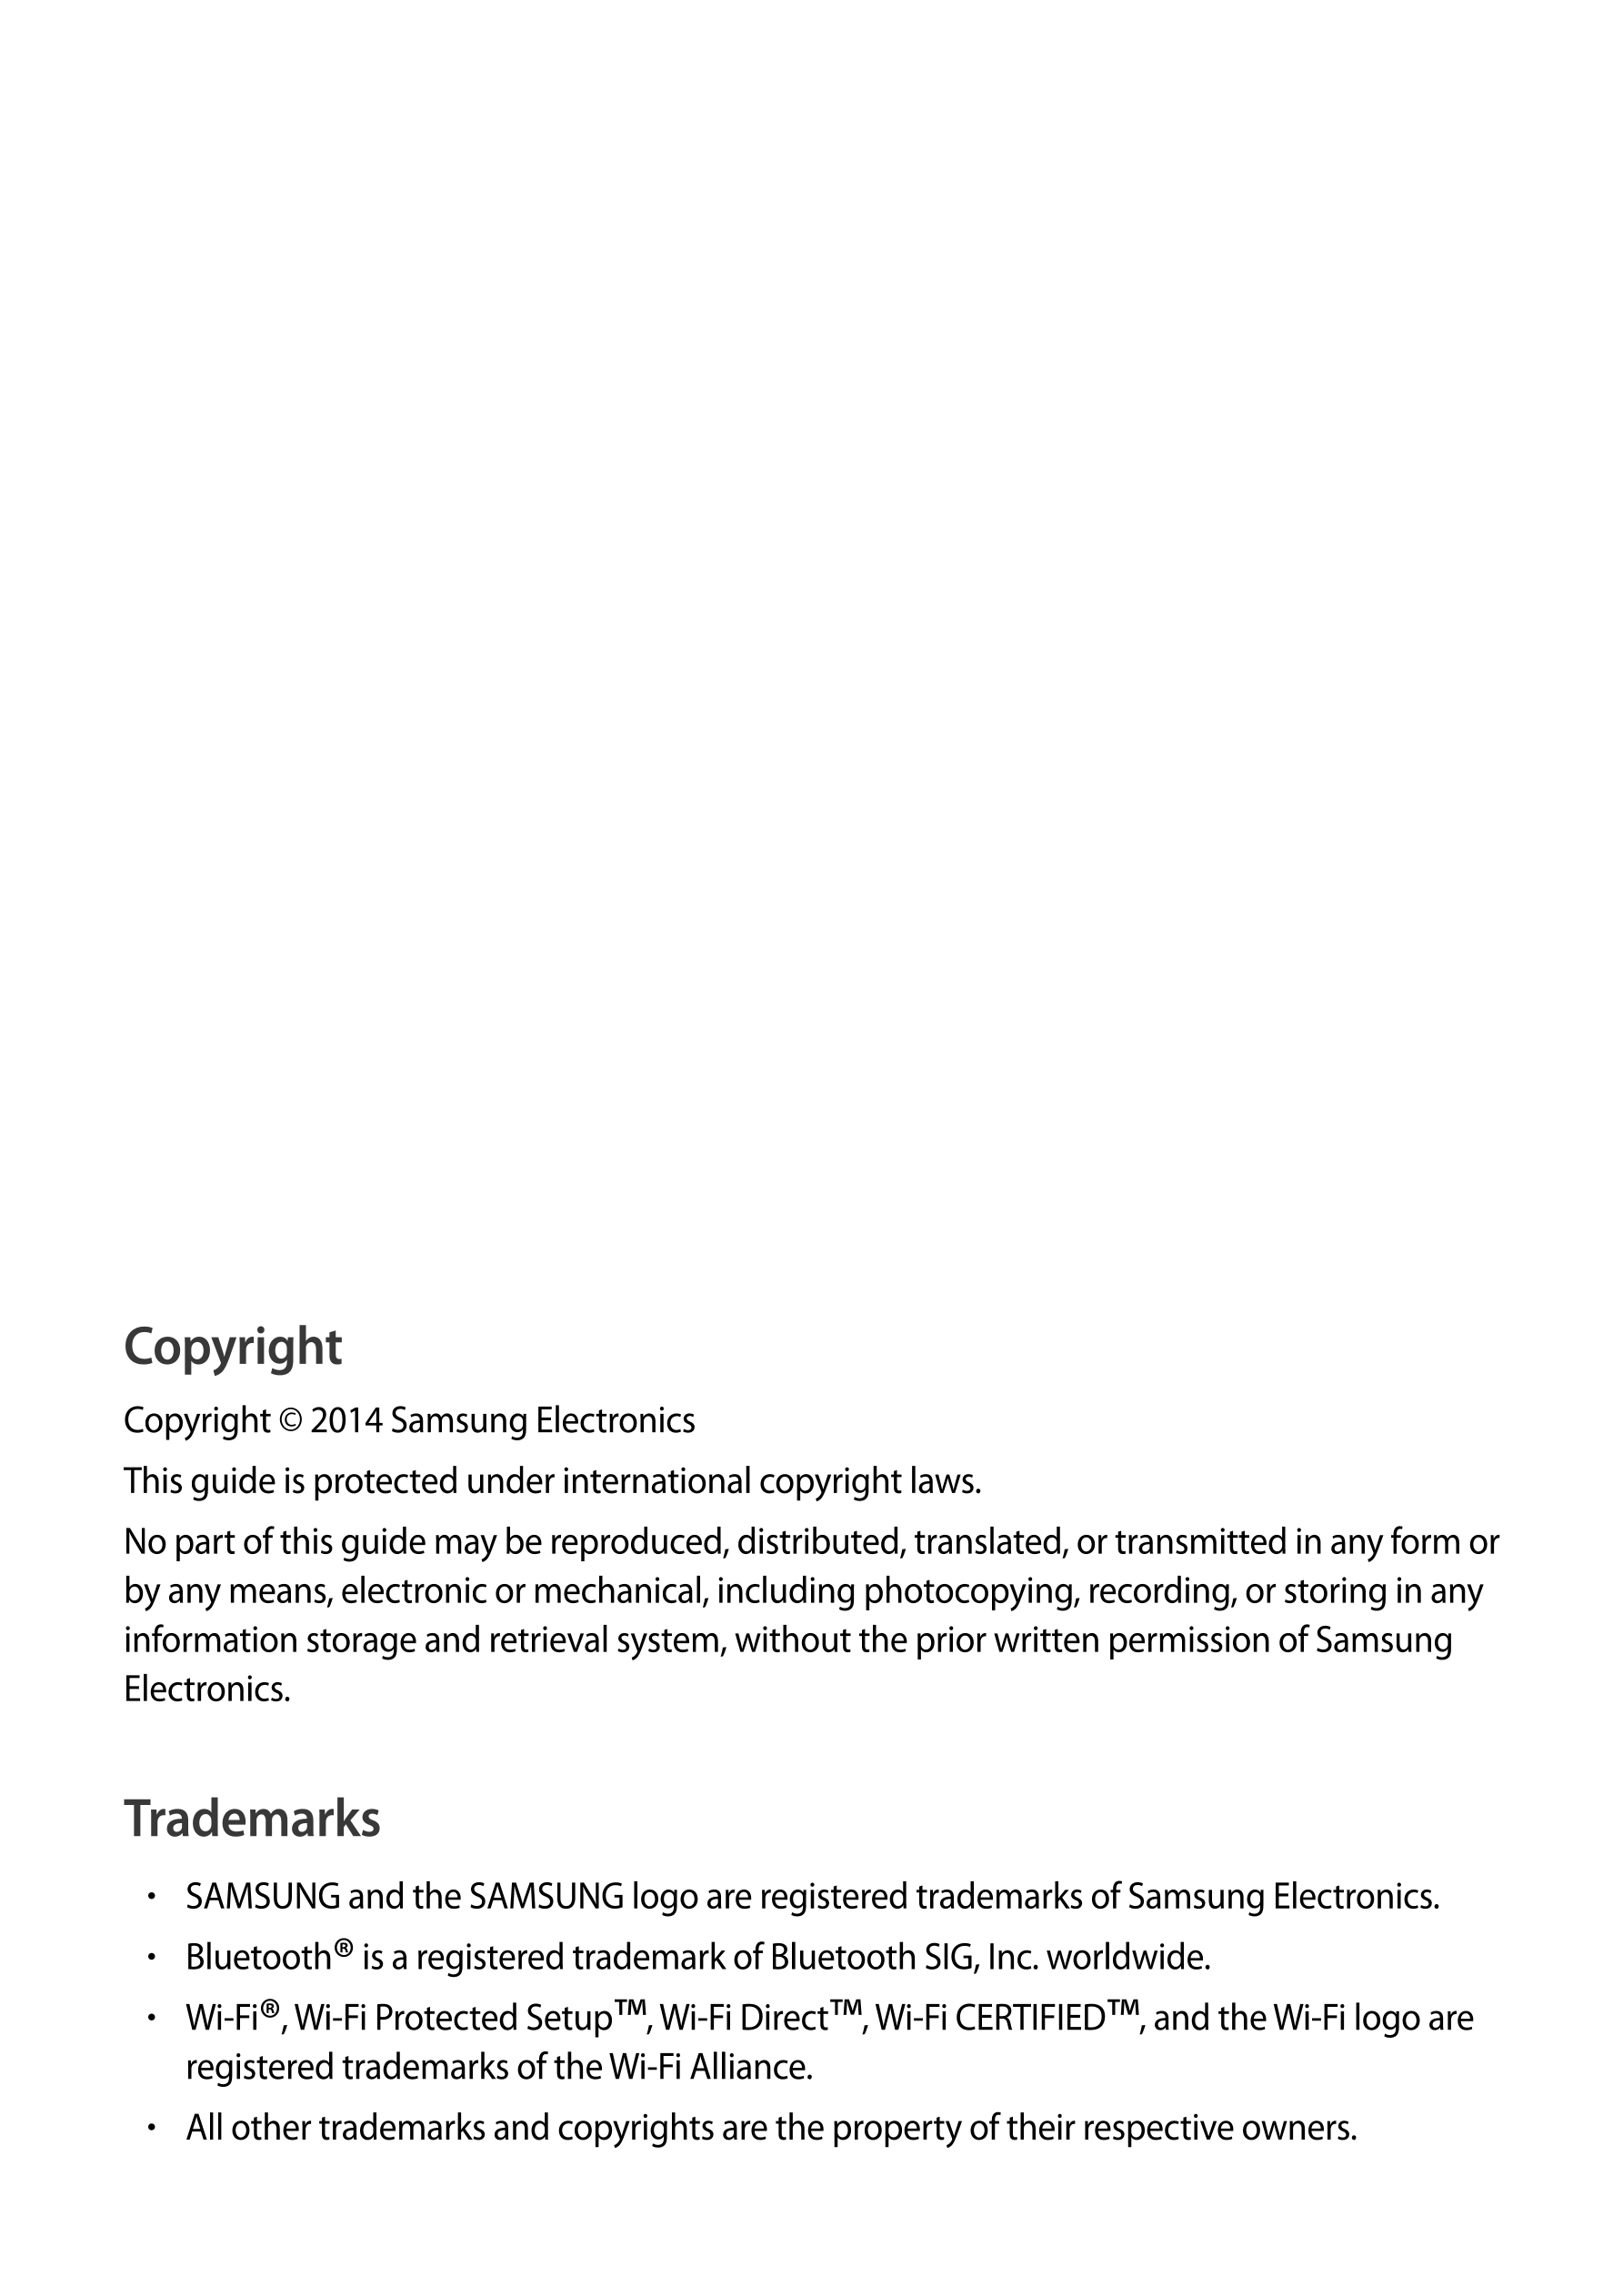 Copyright
Copyright © 2014 Samsung Electronics
This guide is protected under international copyright laws.
No part of this guide